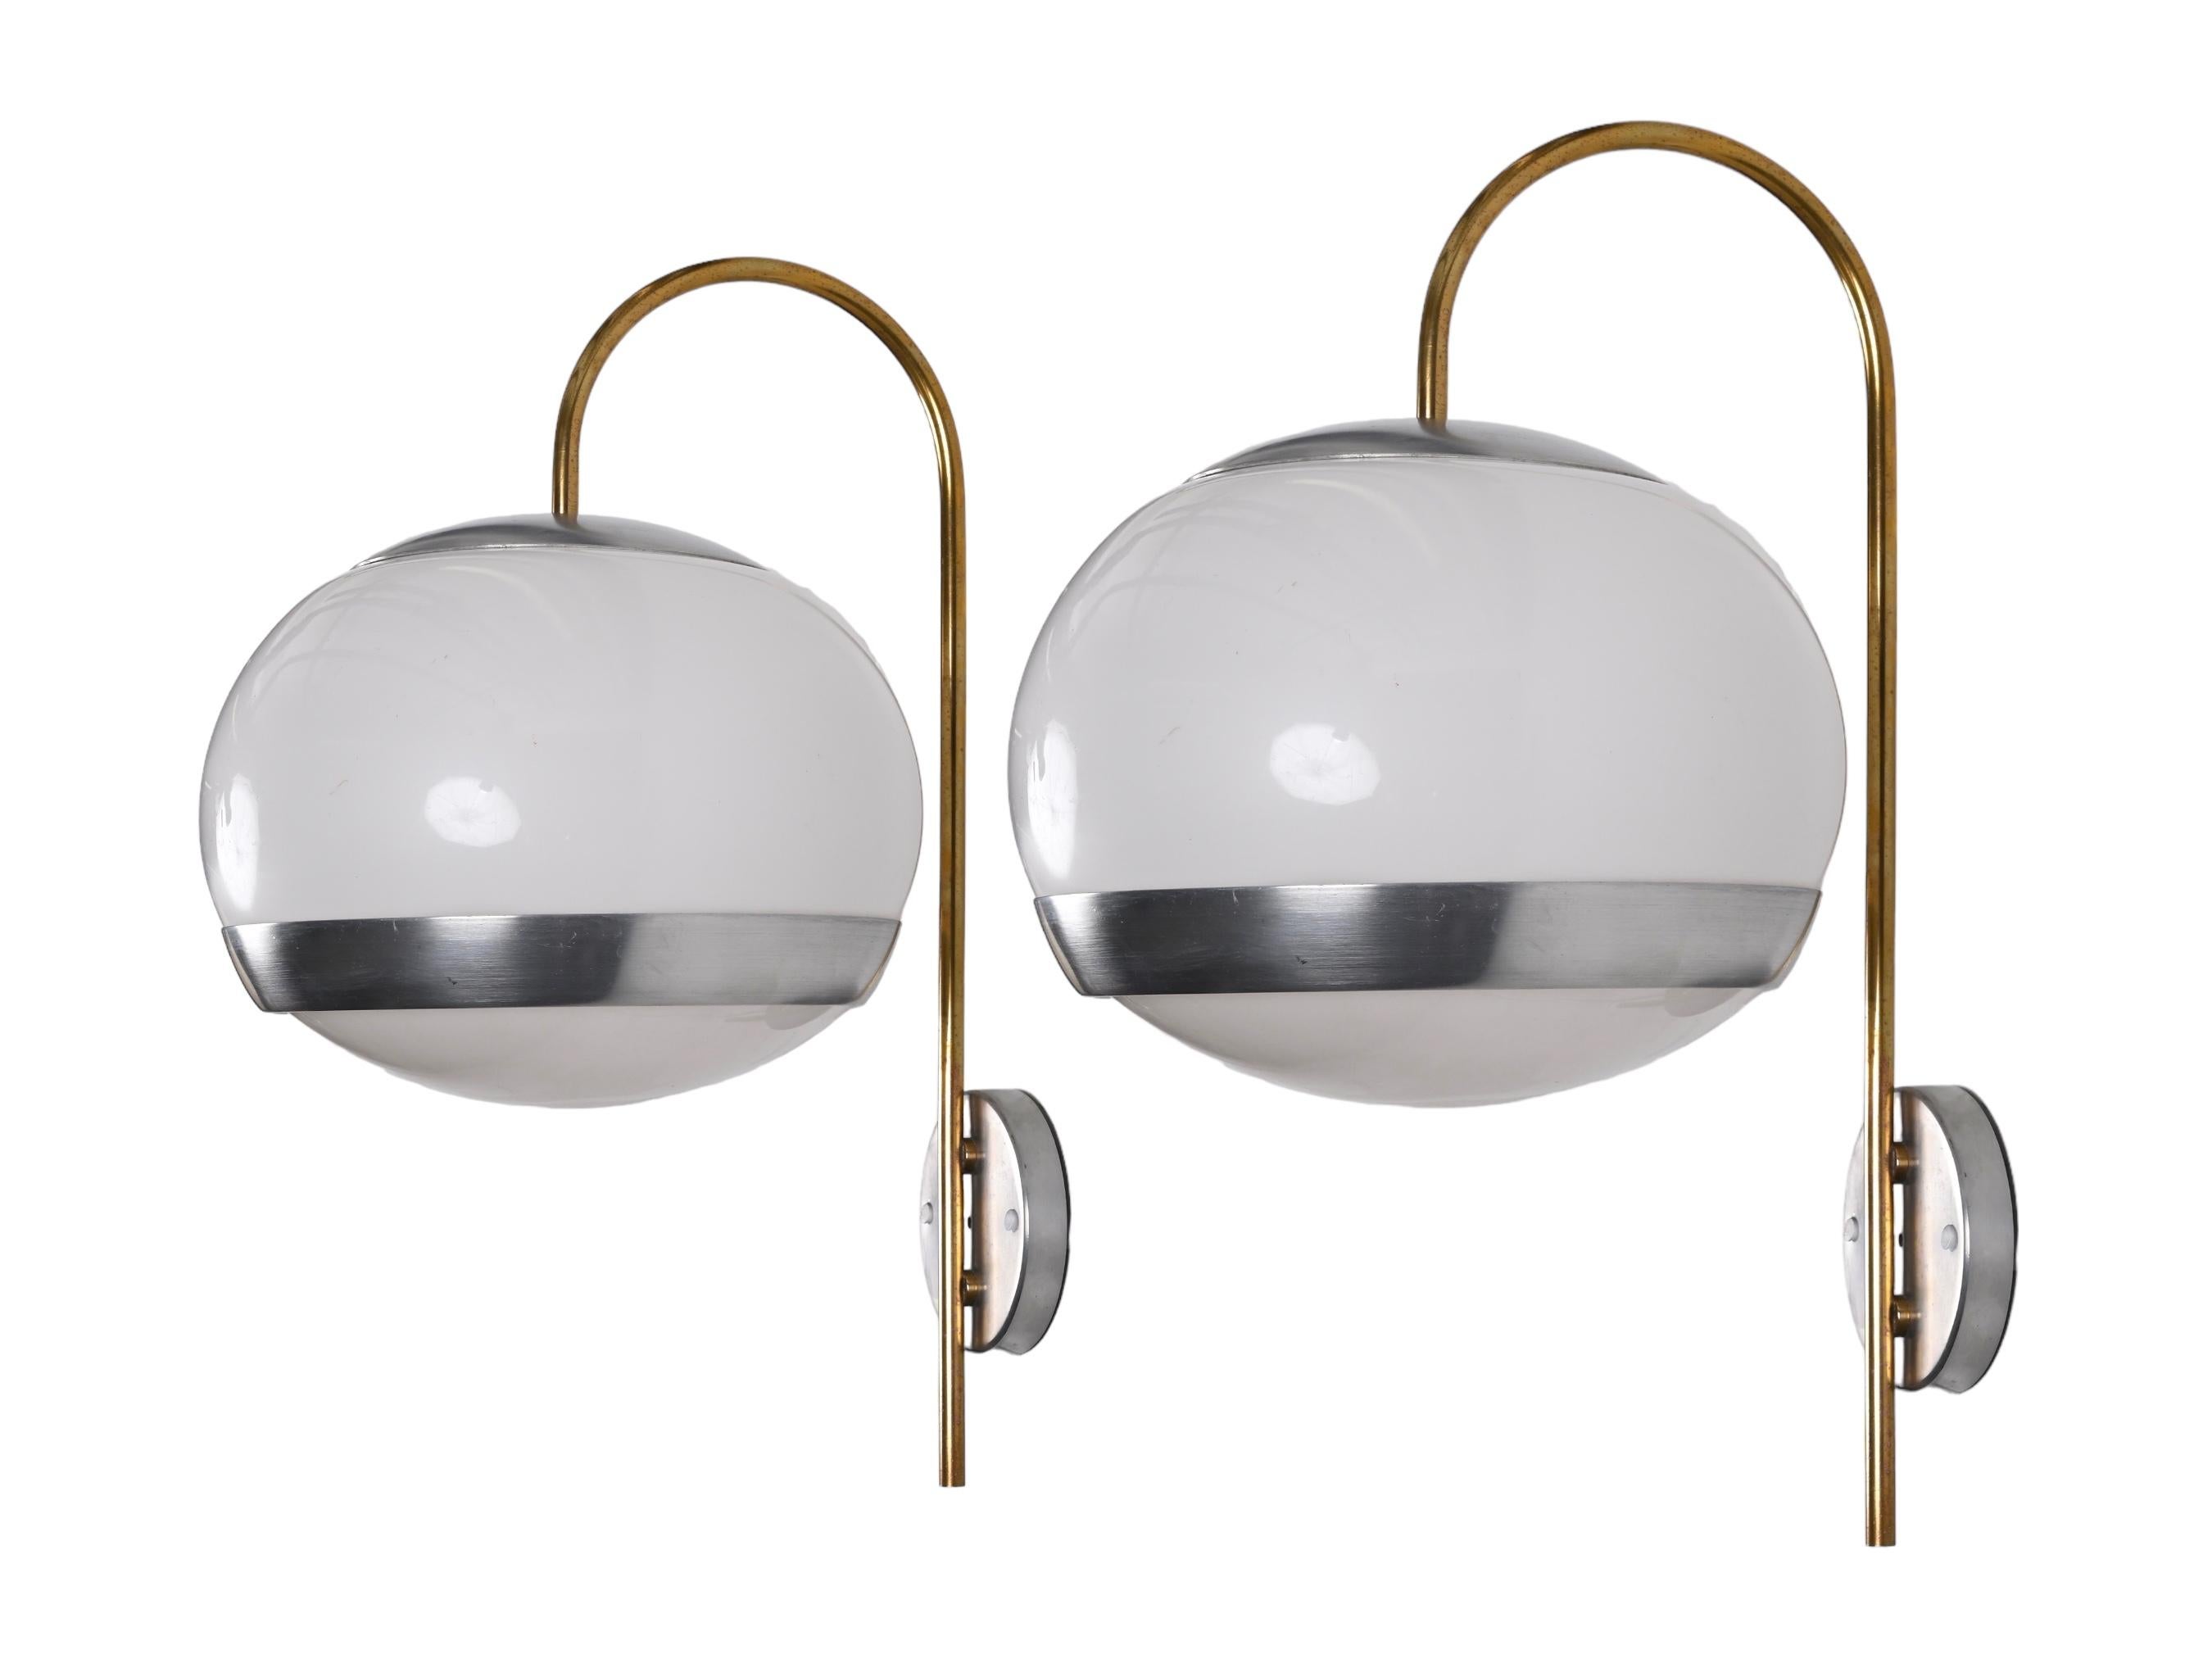 Pair of Stilux Sconces White Lucite and Brass, Italian Lighting, 1970s For Sale 9